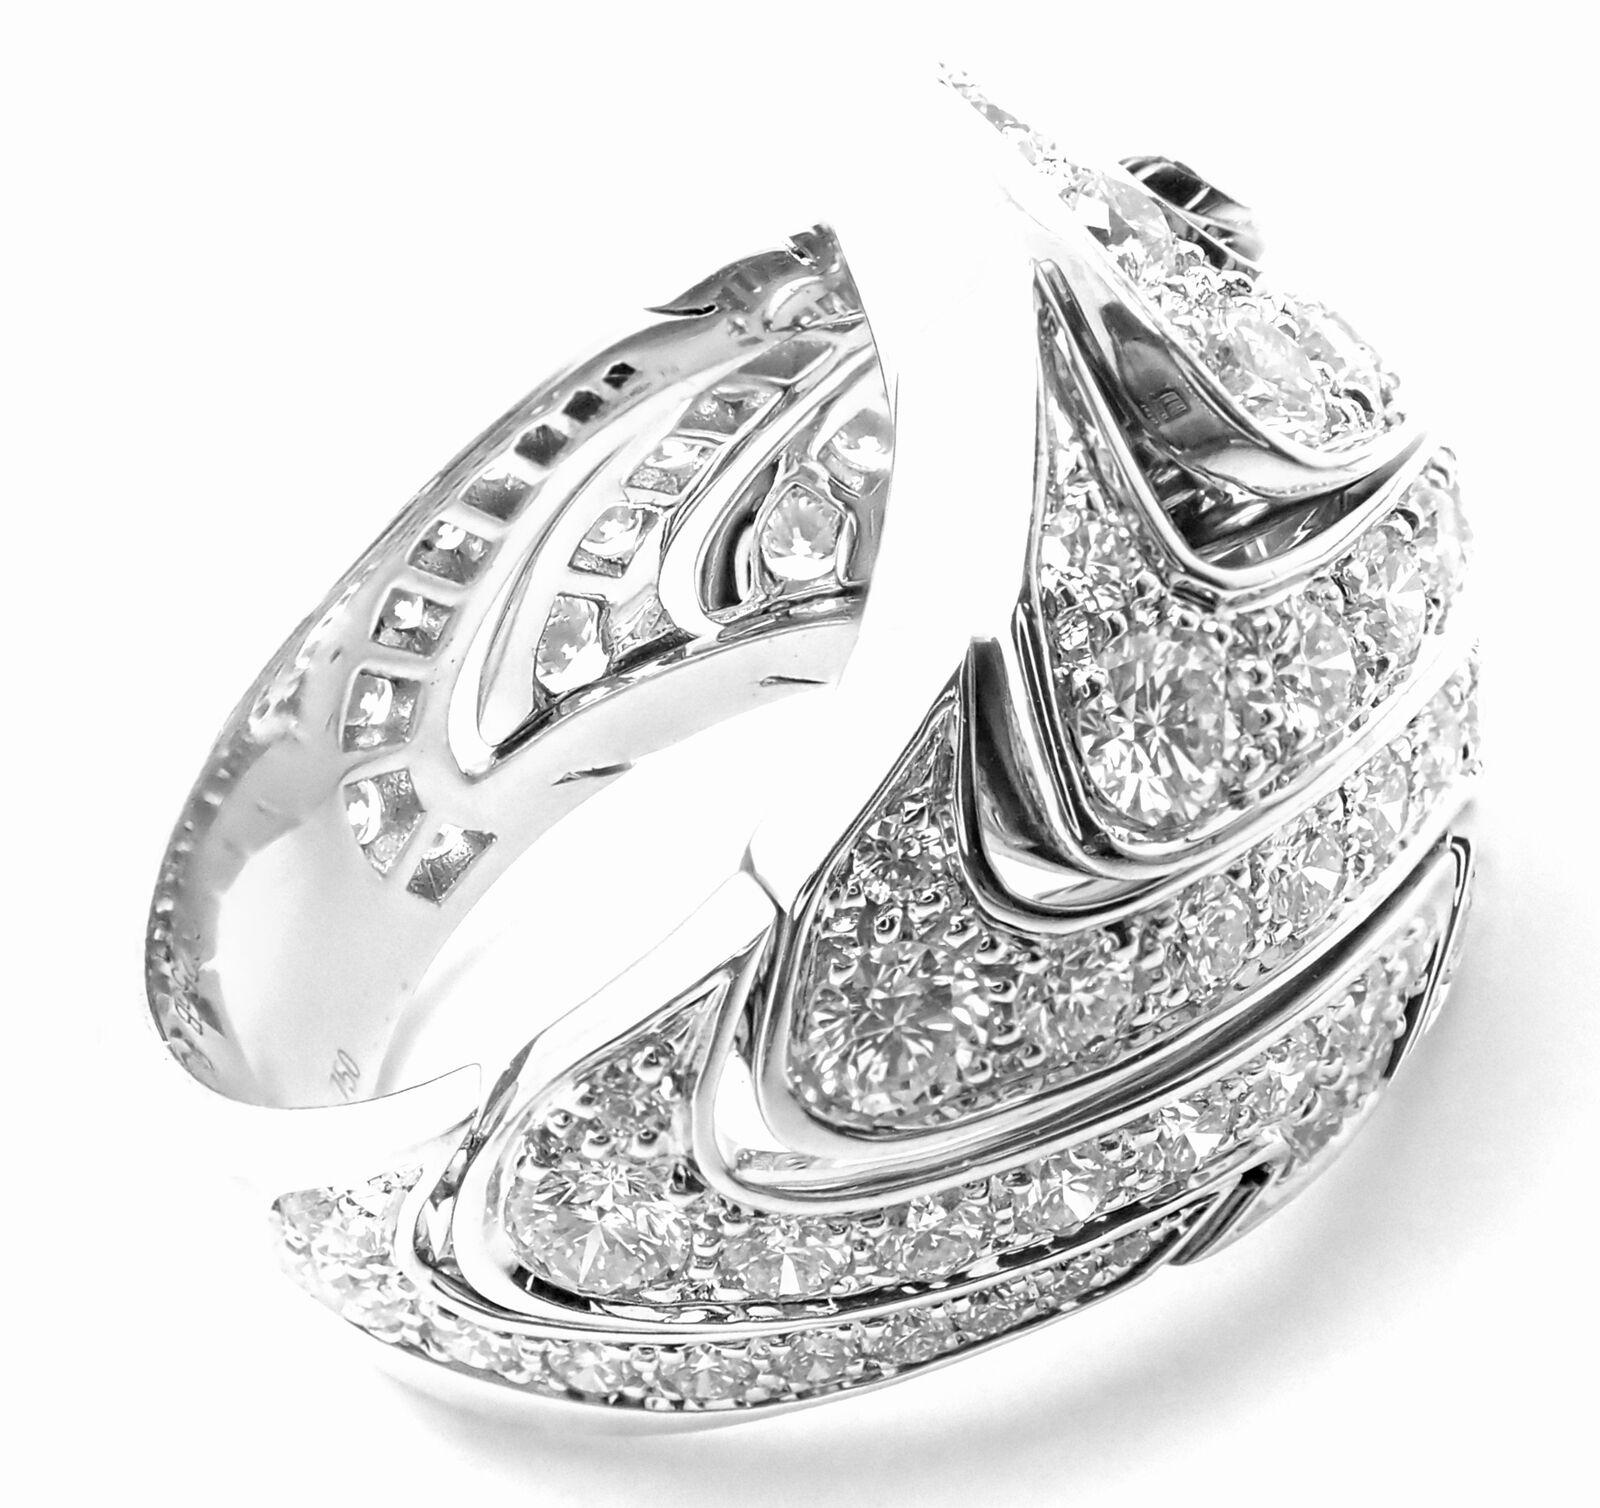 18k White Gold Diamond Diamond Large Ring by Cartier.  
This ring comes with a Cartier box.
With 86 Round brilliant cut diamonds VVS1 clarity, E color total weight approximately 4.30ct
Details: 
Ring Size: European 58, US 8 1/4
Weight:  26.2